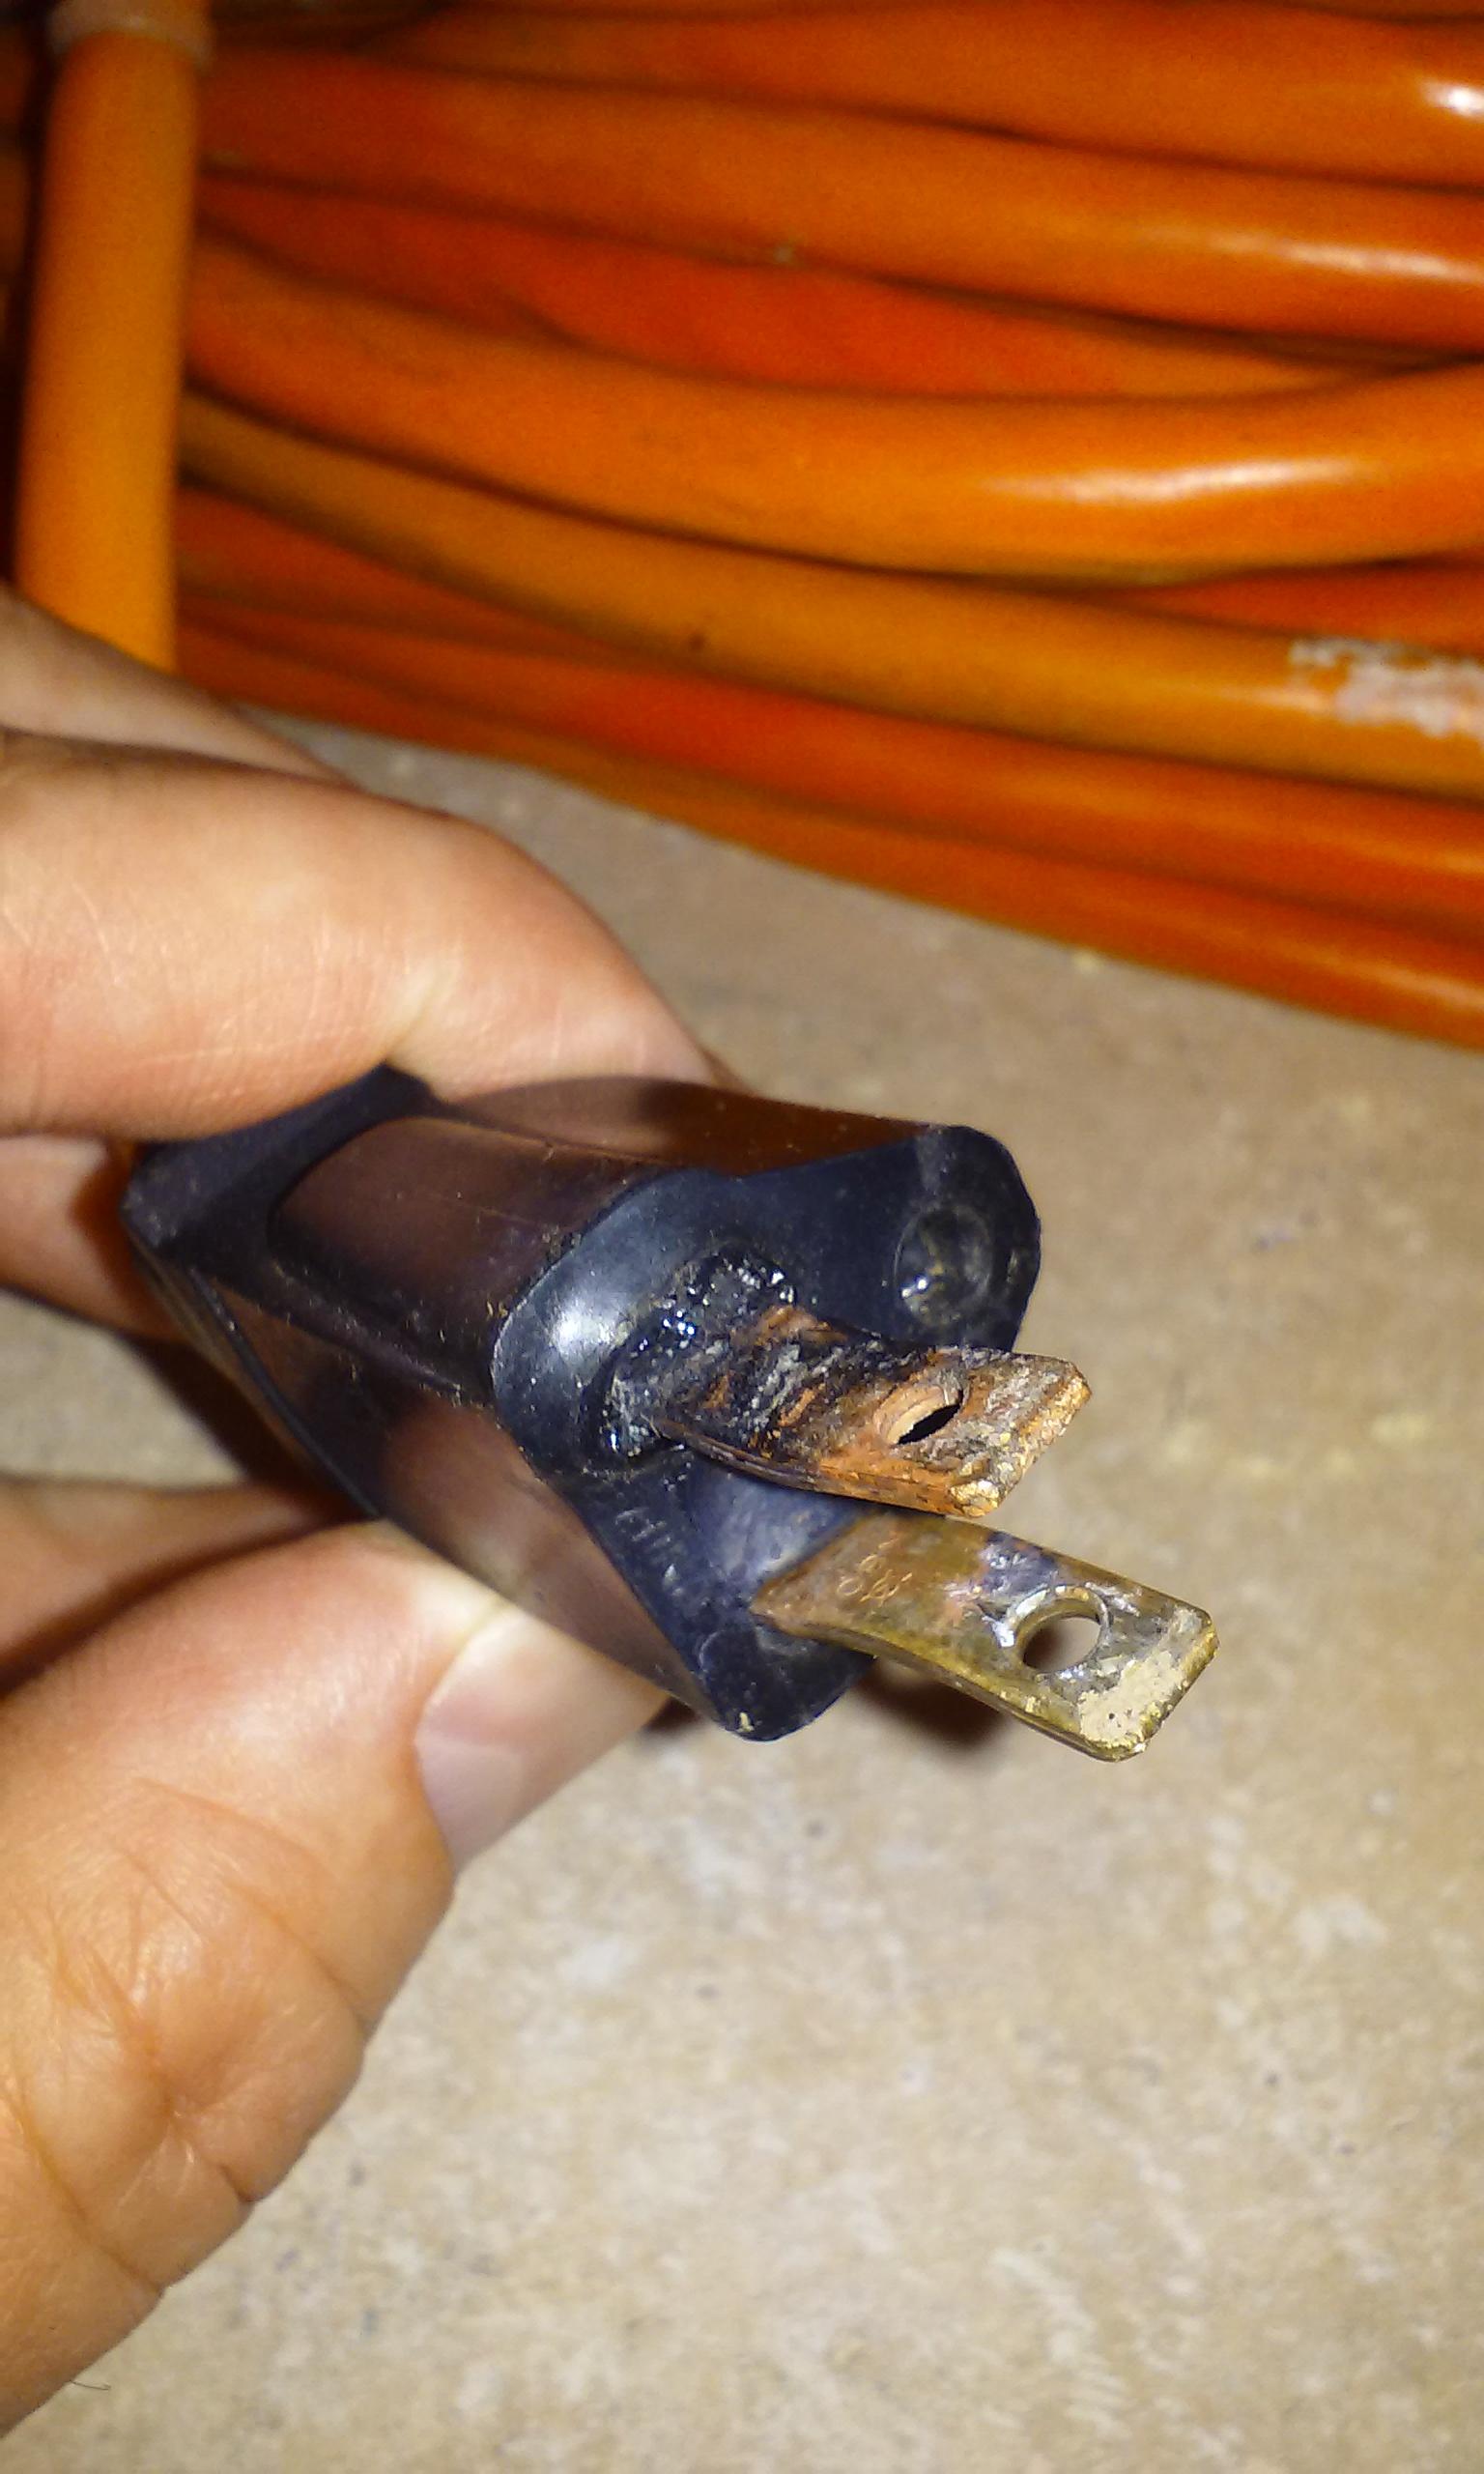 extension cord's plug started to melt. Is it OK to replace it or is ...